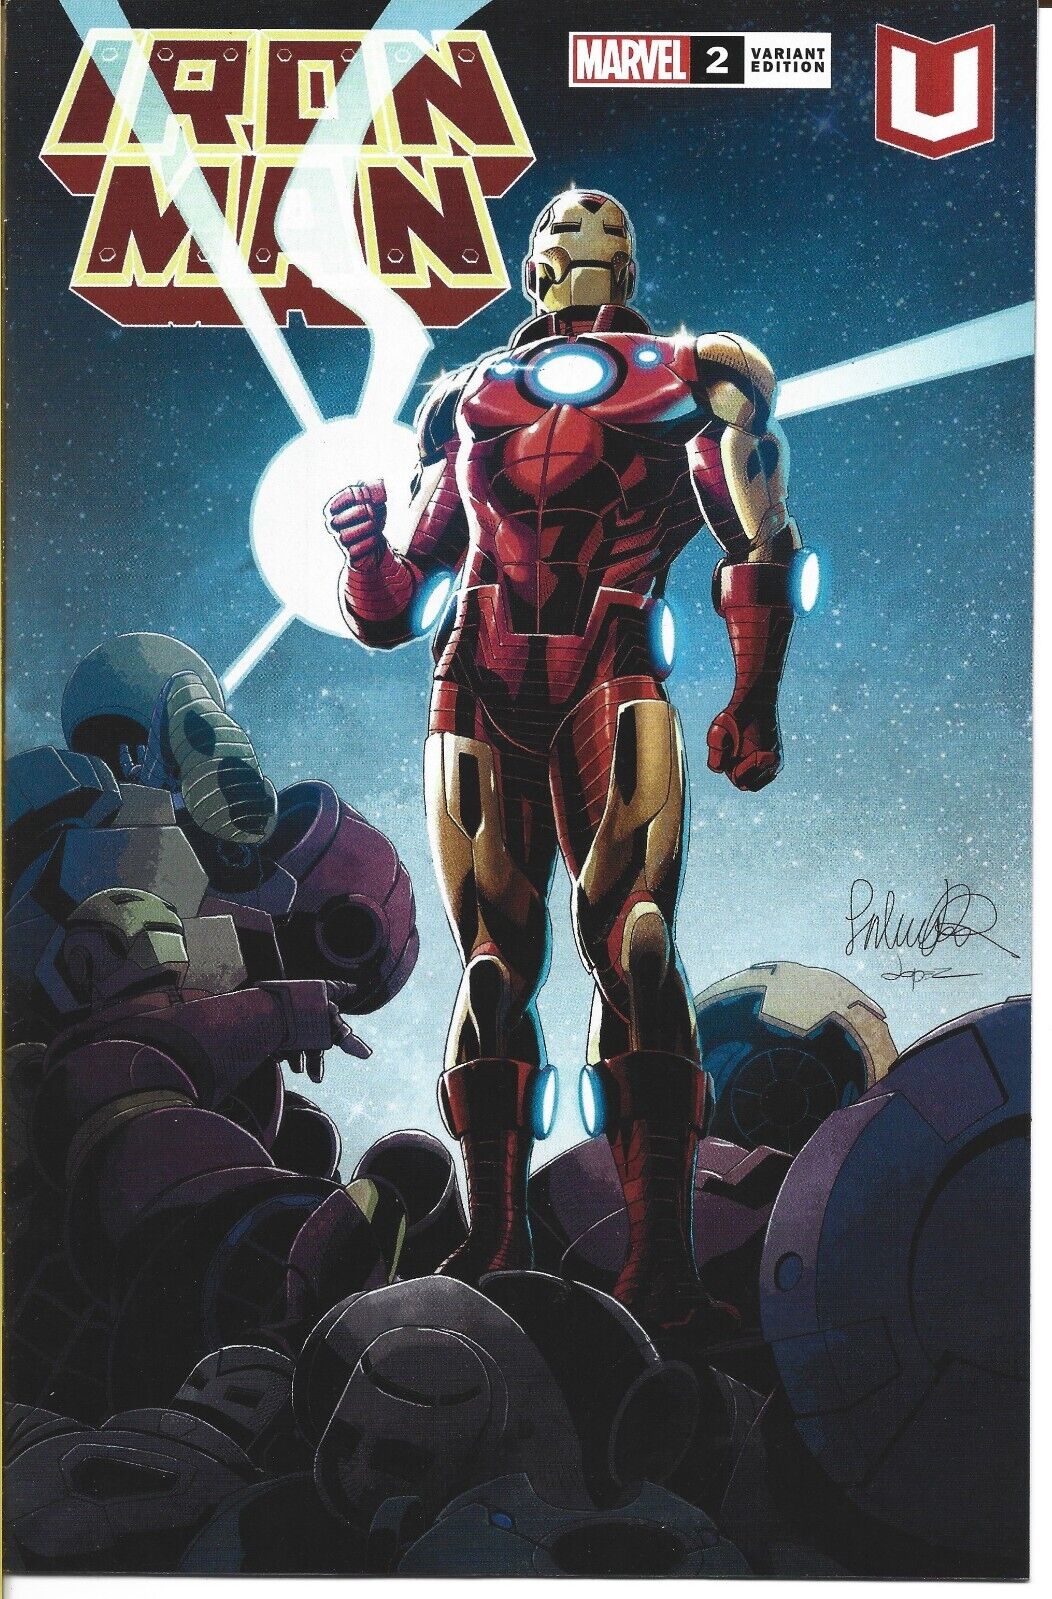 IRON MAN #2 MARVEL UNLIMITED COVER 2020 NEW AND UNREAD BAGGED AND BOARDED